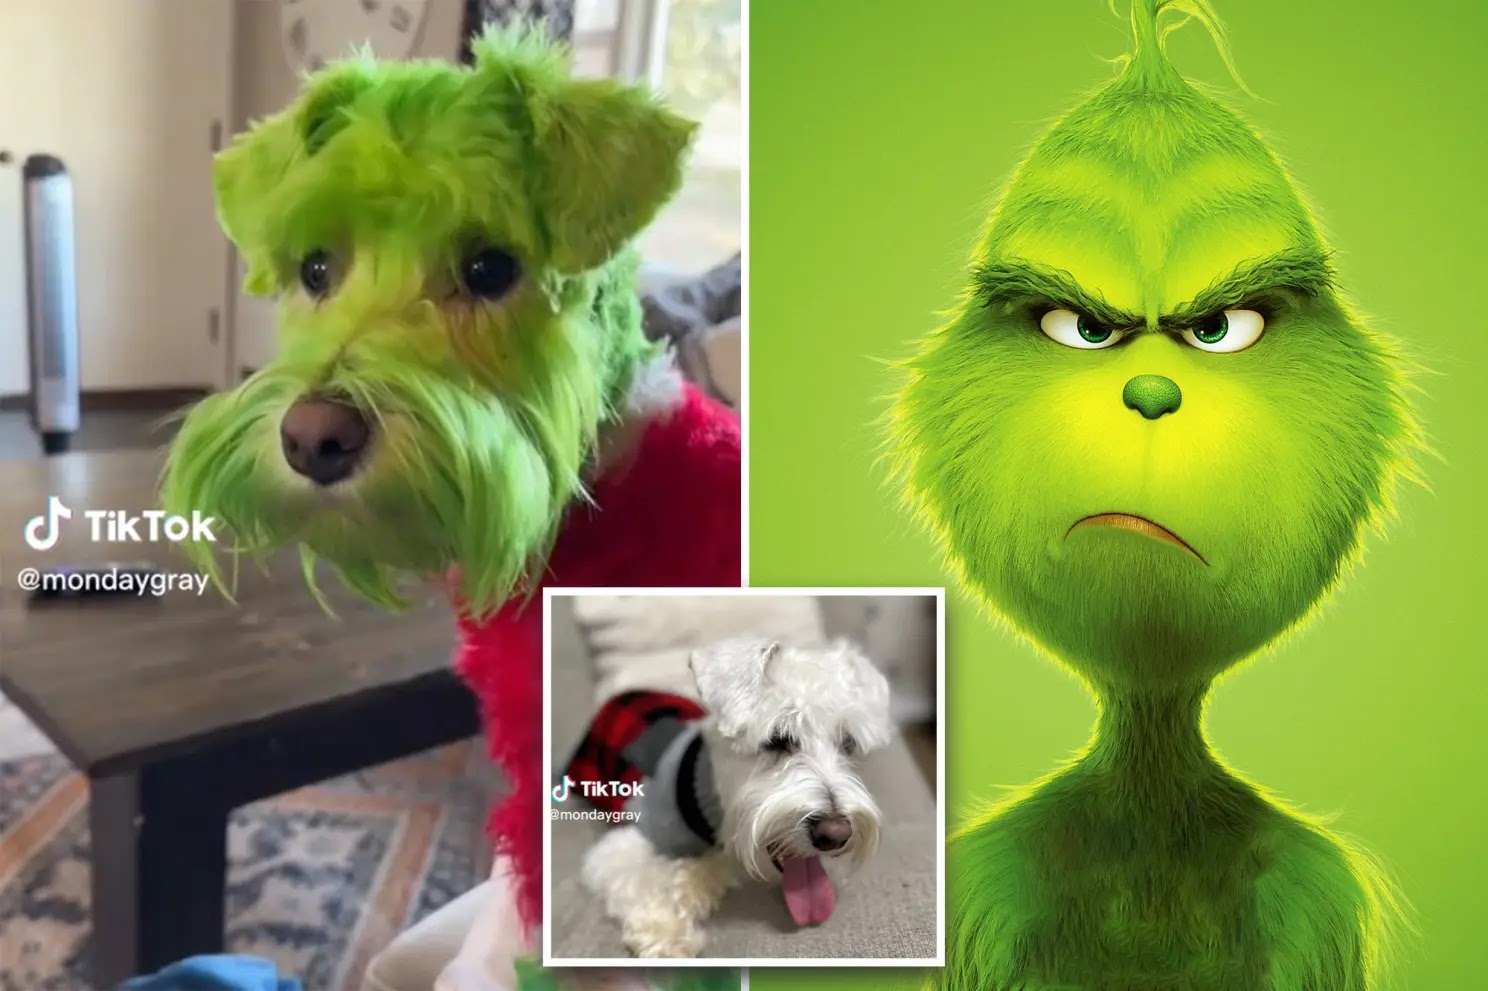 Dog dyed green to look like The Grinch